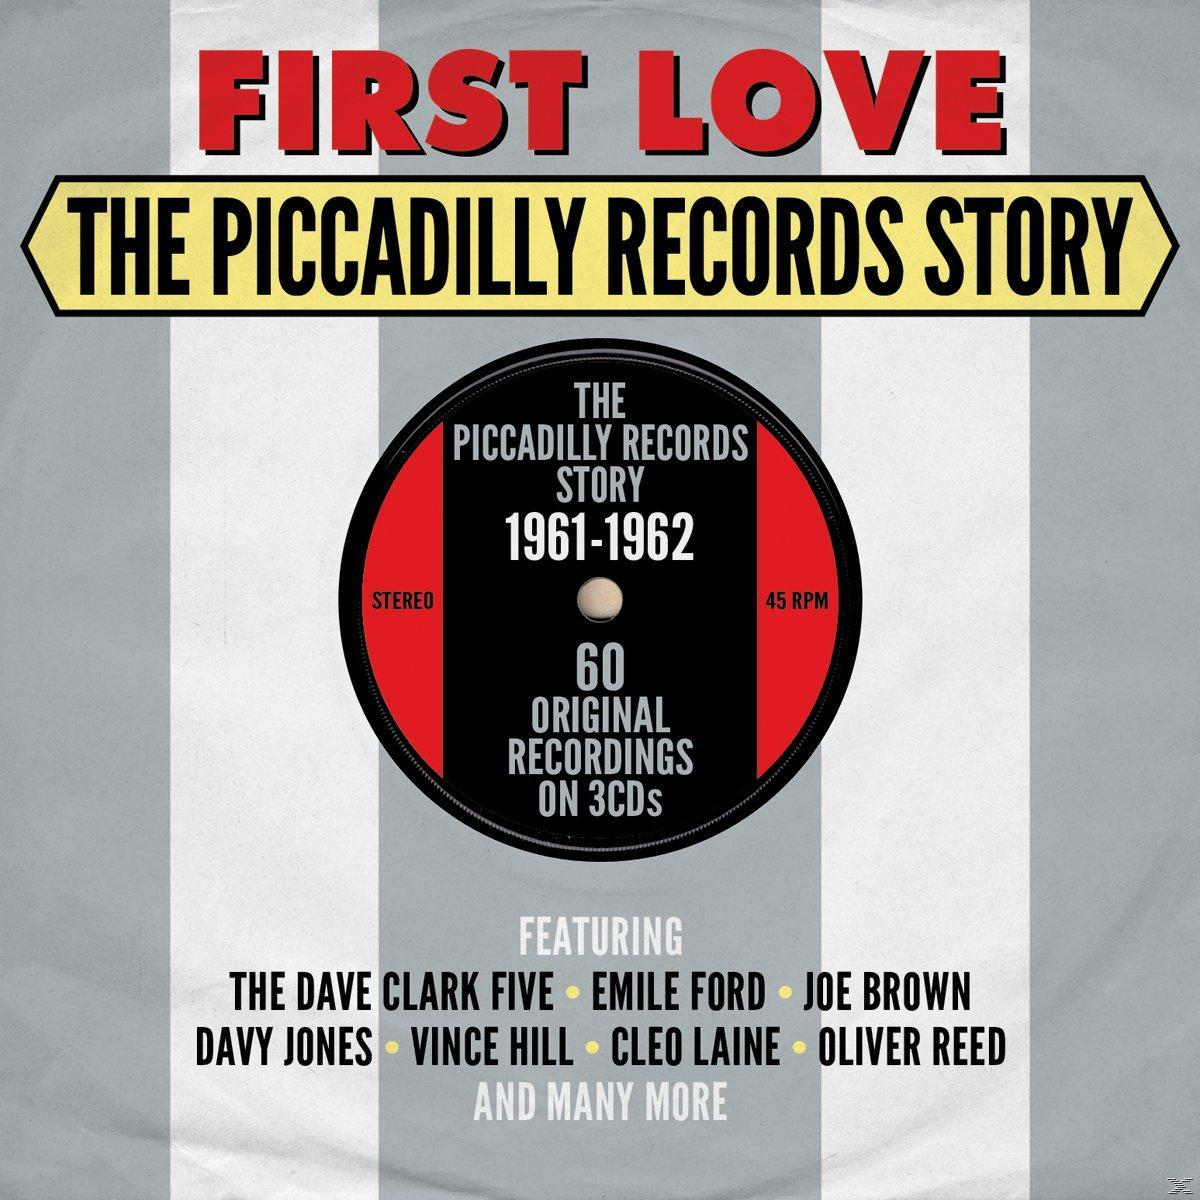 VARIOUS - First Story (CD) Love Records - - 1961-62 Picadilly